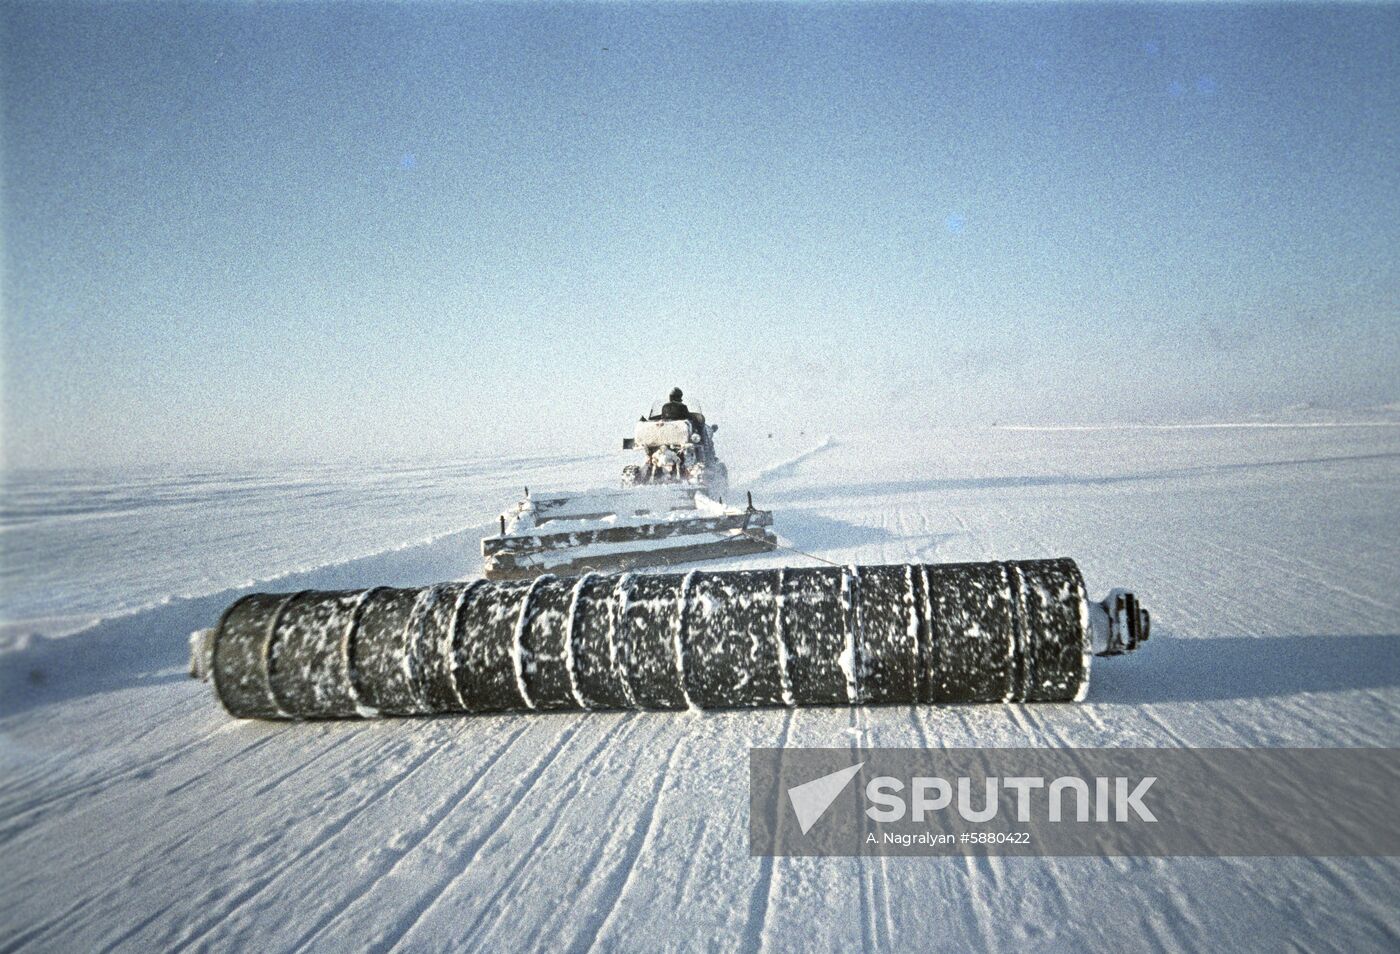 North Pole 16 drifting scientific research station